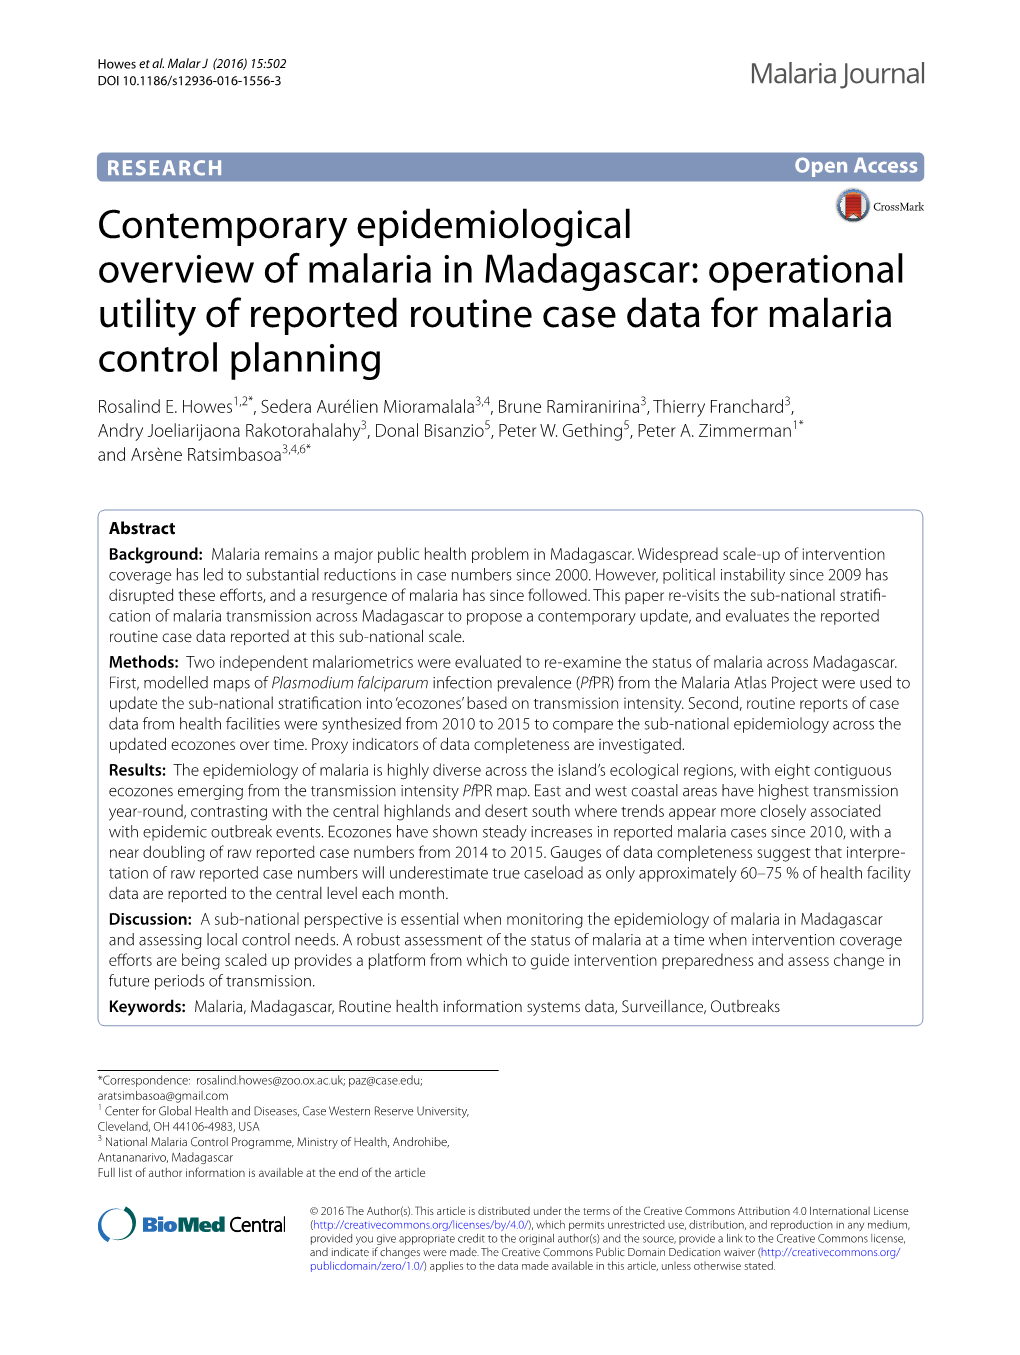 Contemporary Epidemiological Overview of Malaria in Madagascar: Operational Utility of Reported Routine Case Data for Malaria Control Planning Rosalind E